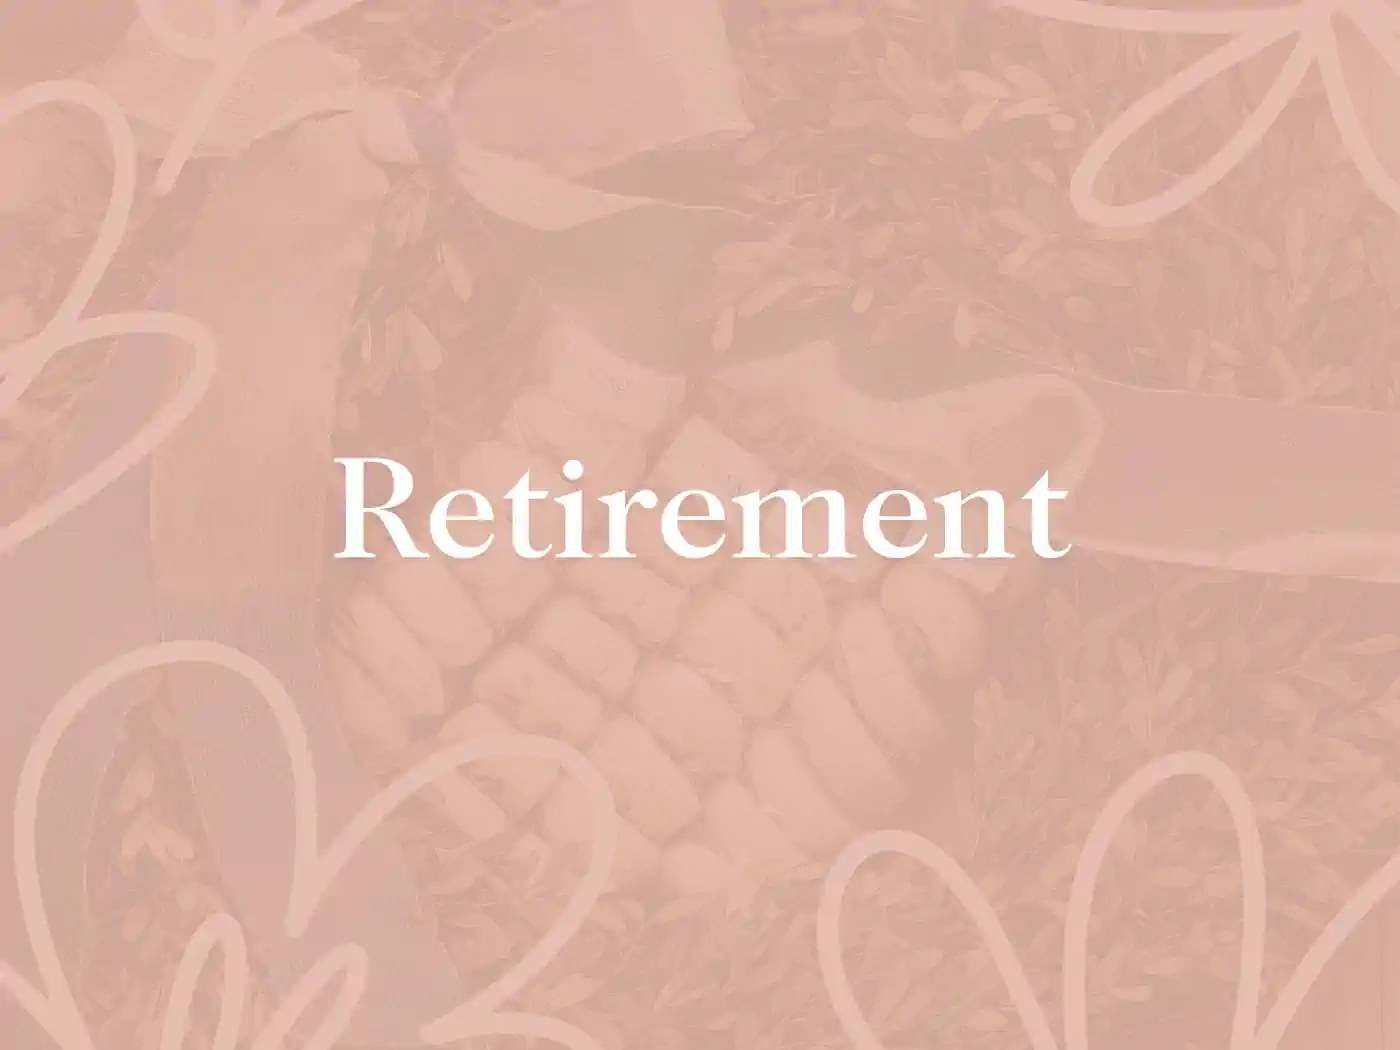 Retirement text overlay on a floral-themed background. Fabulous Flowers and Gifts. Collection: Retirement.